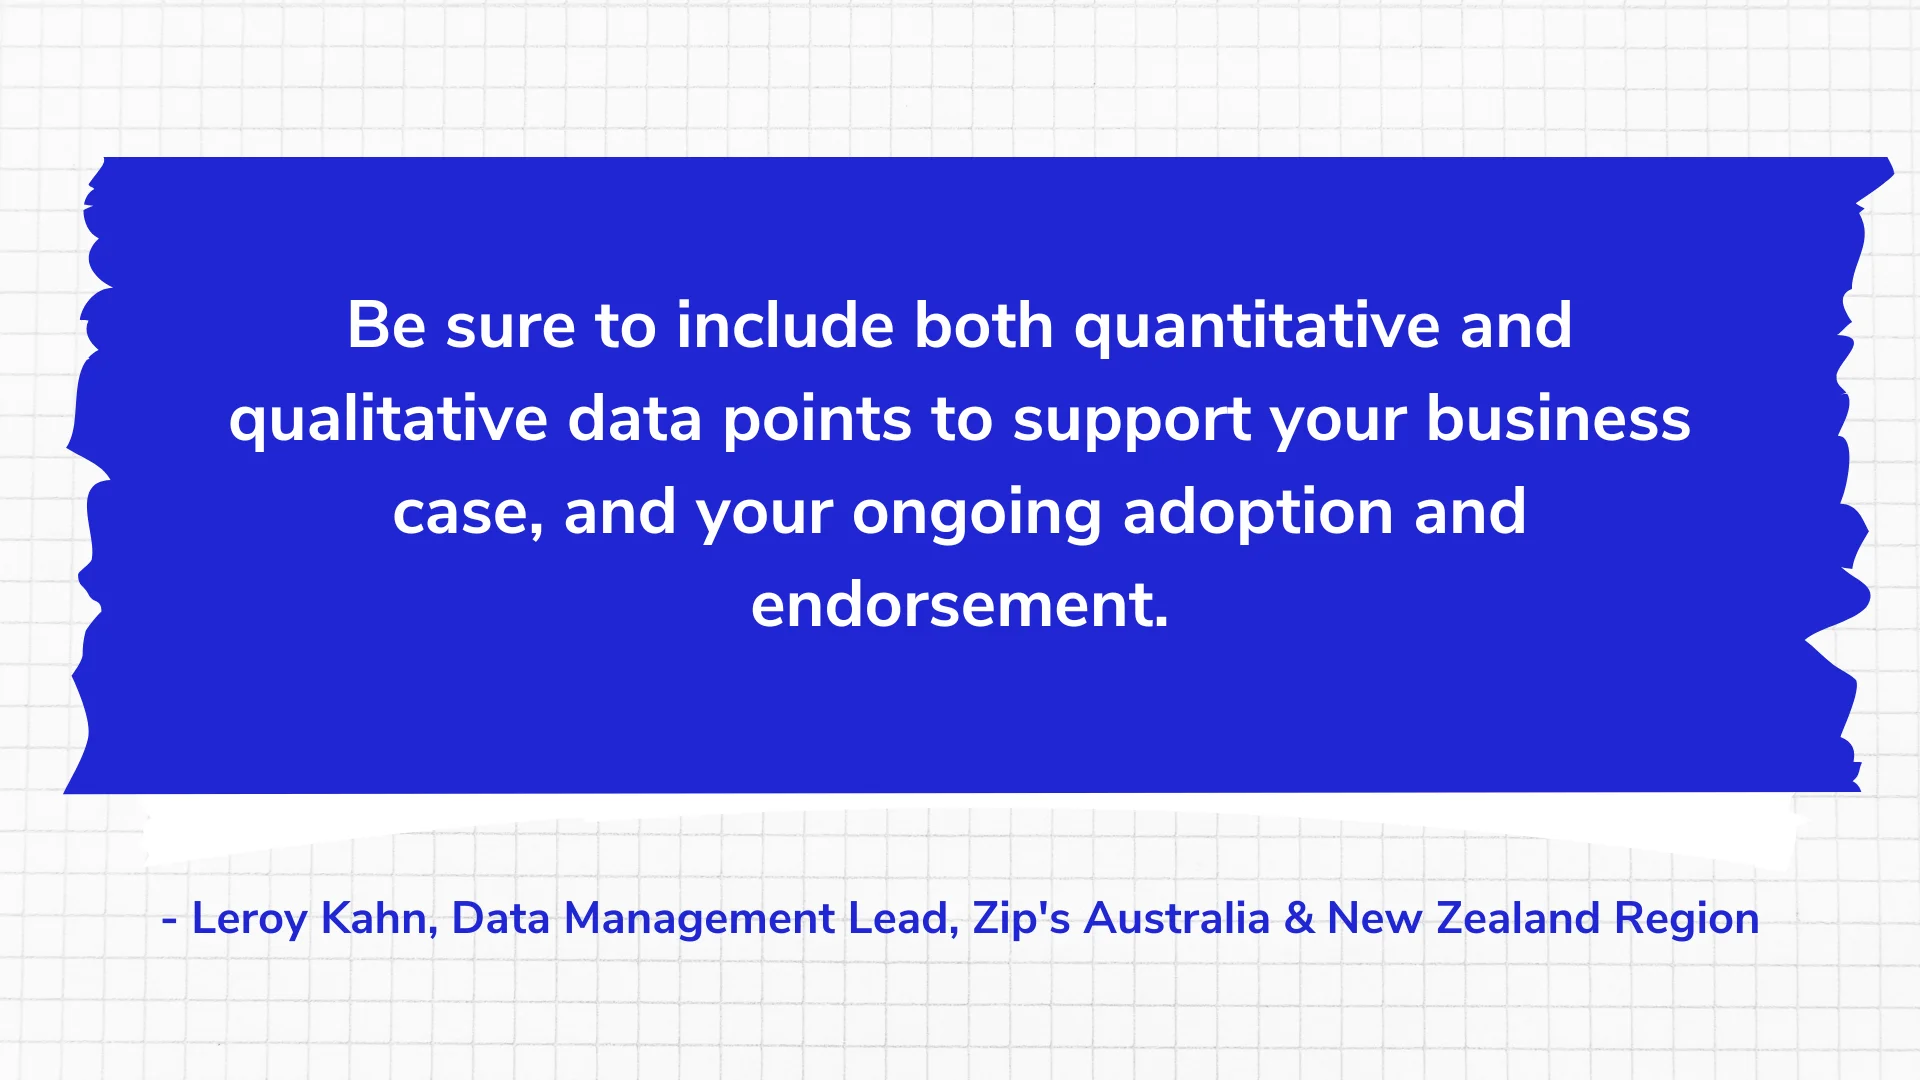 Be sure to include both quantitative and qualitative data points to support your business case, and your ongoing adoption and endorsement